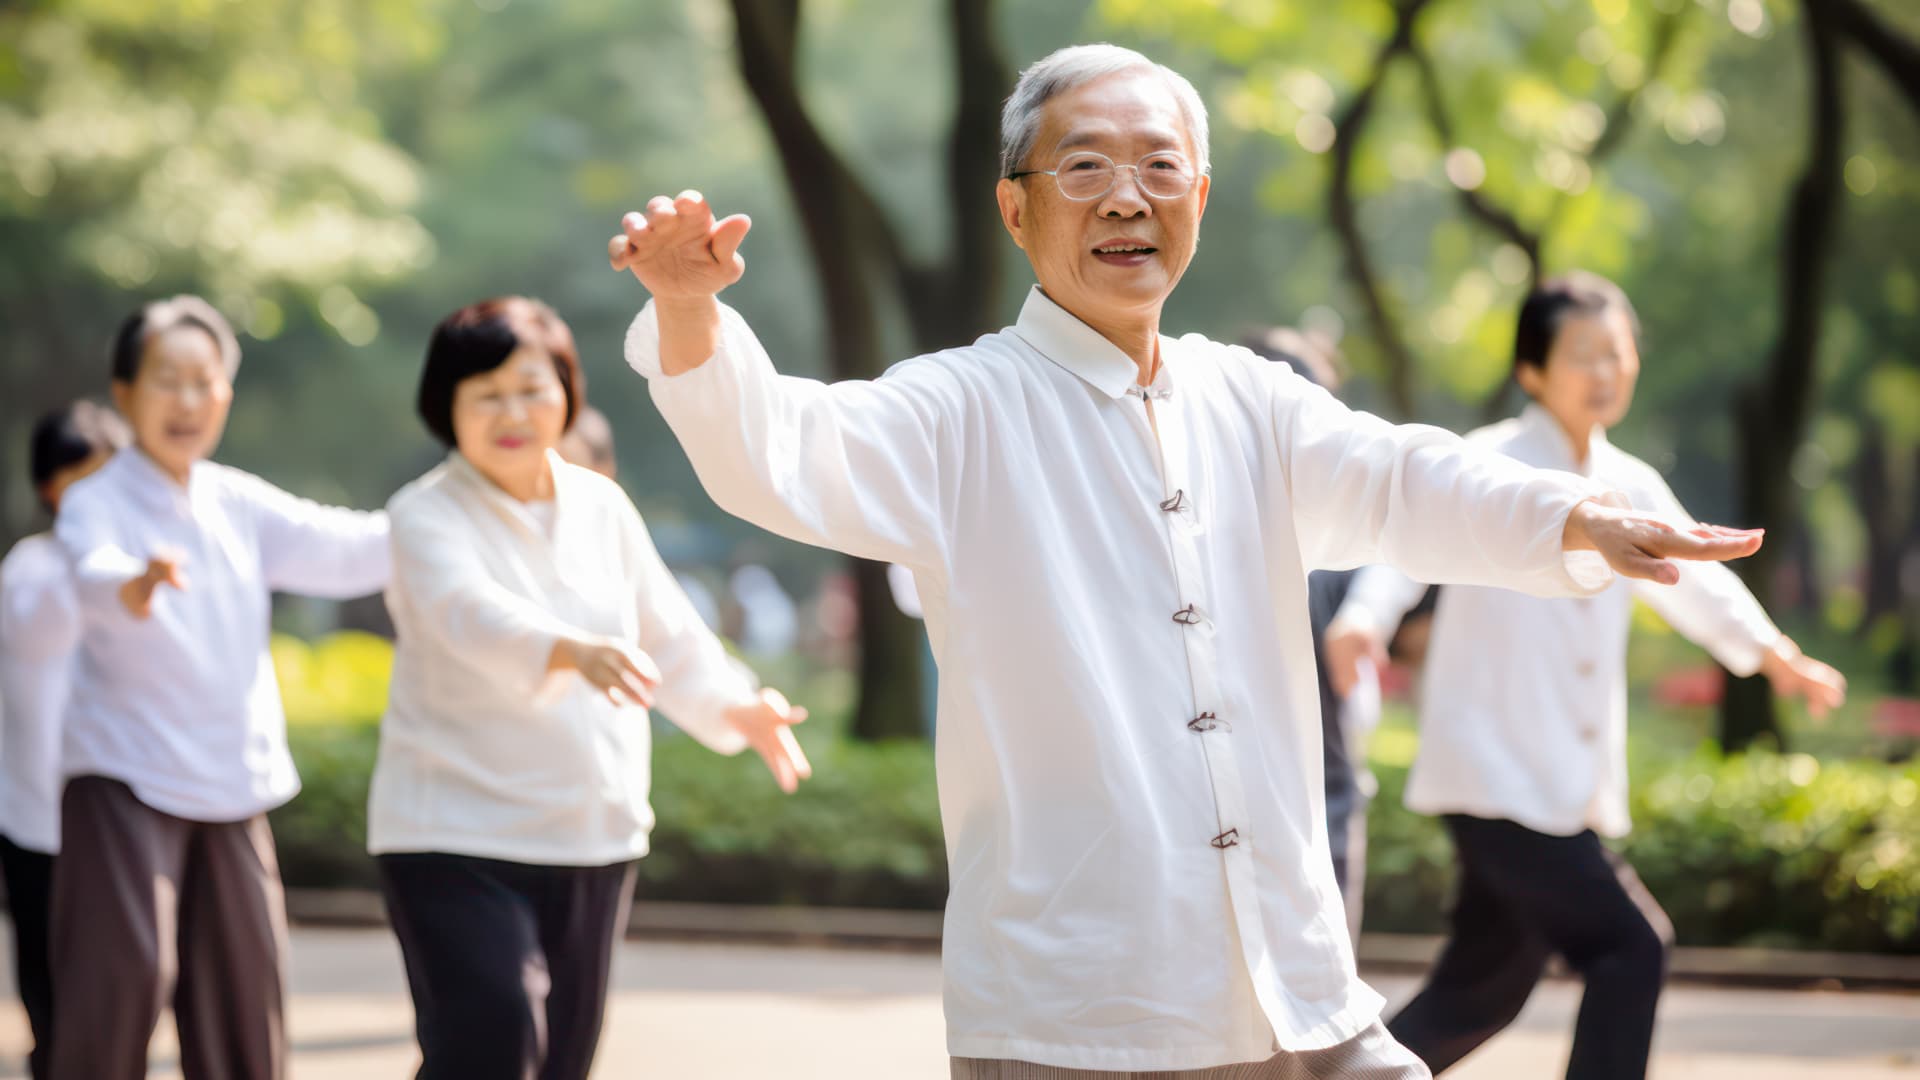 A group of elderly Asian people practice Tai Chi in a sunny park